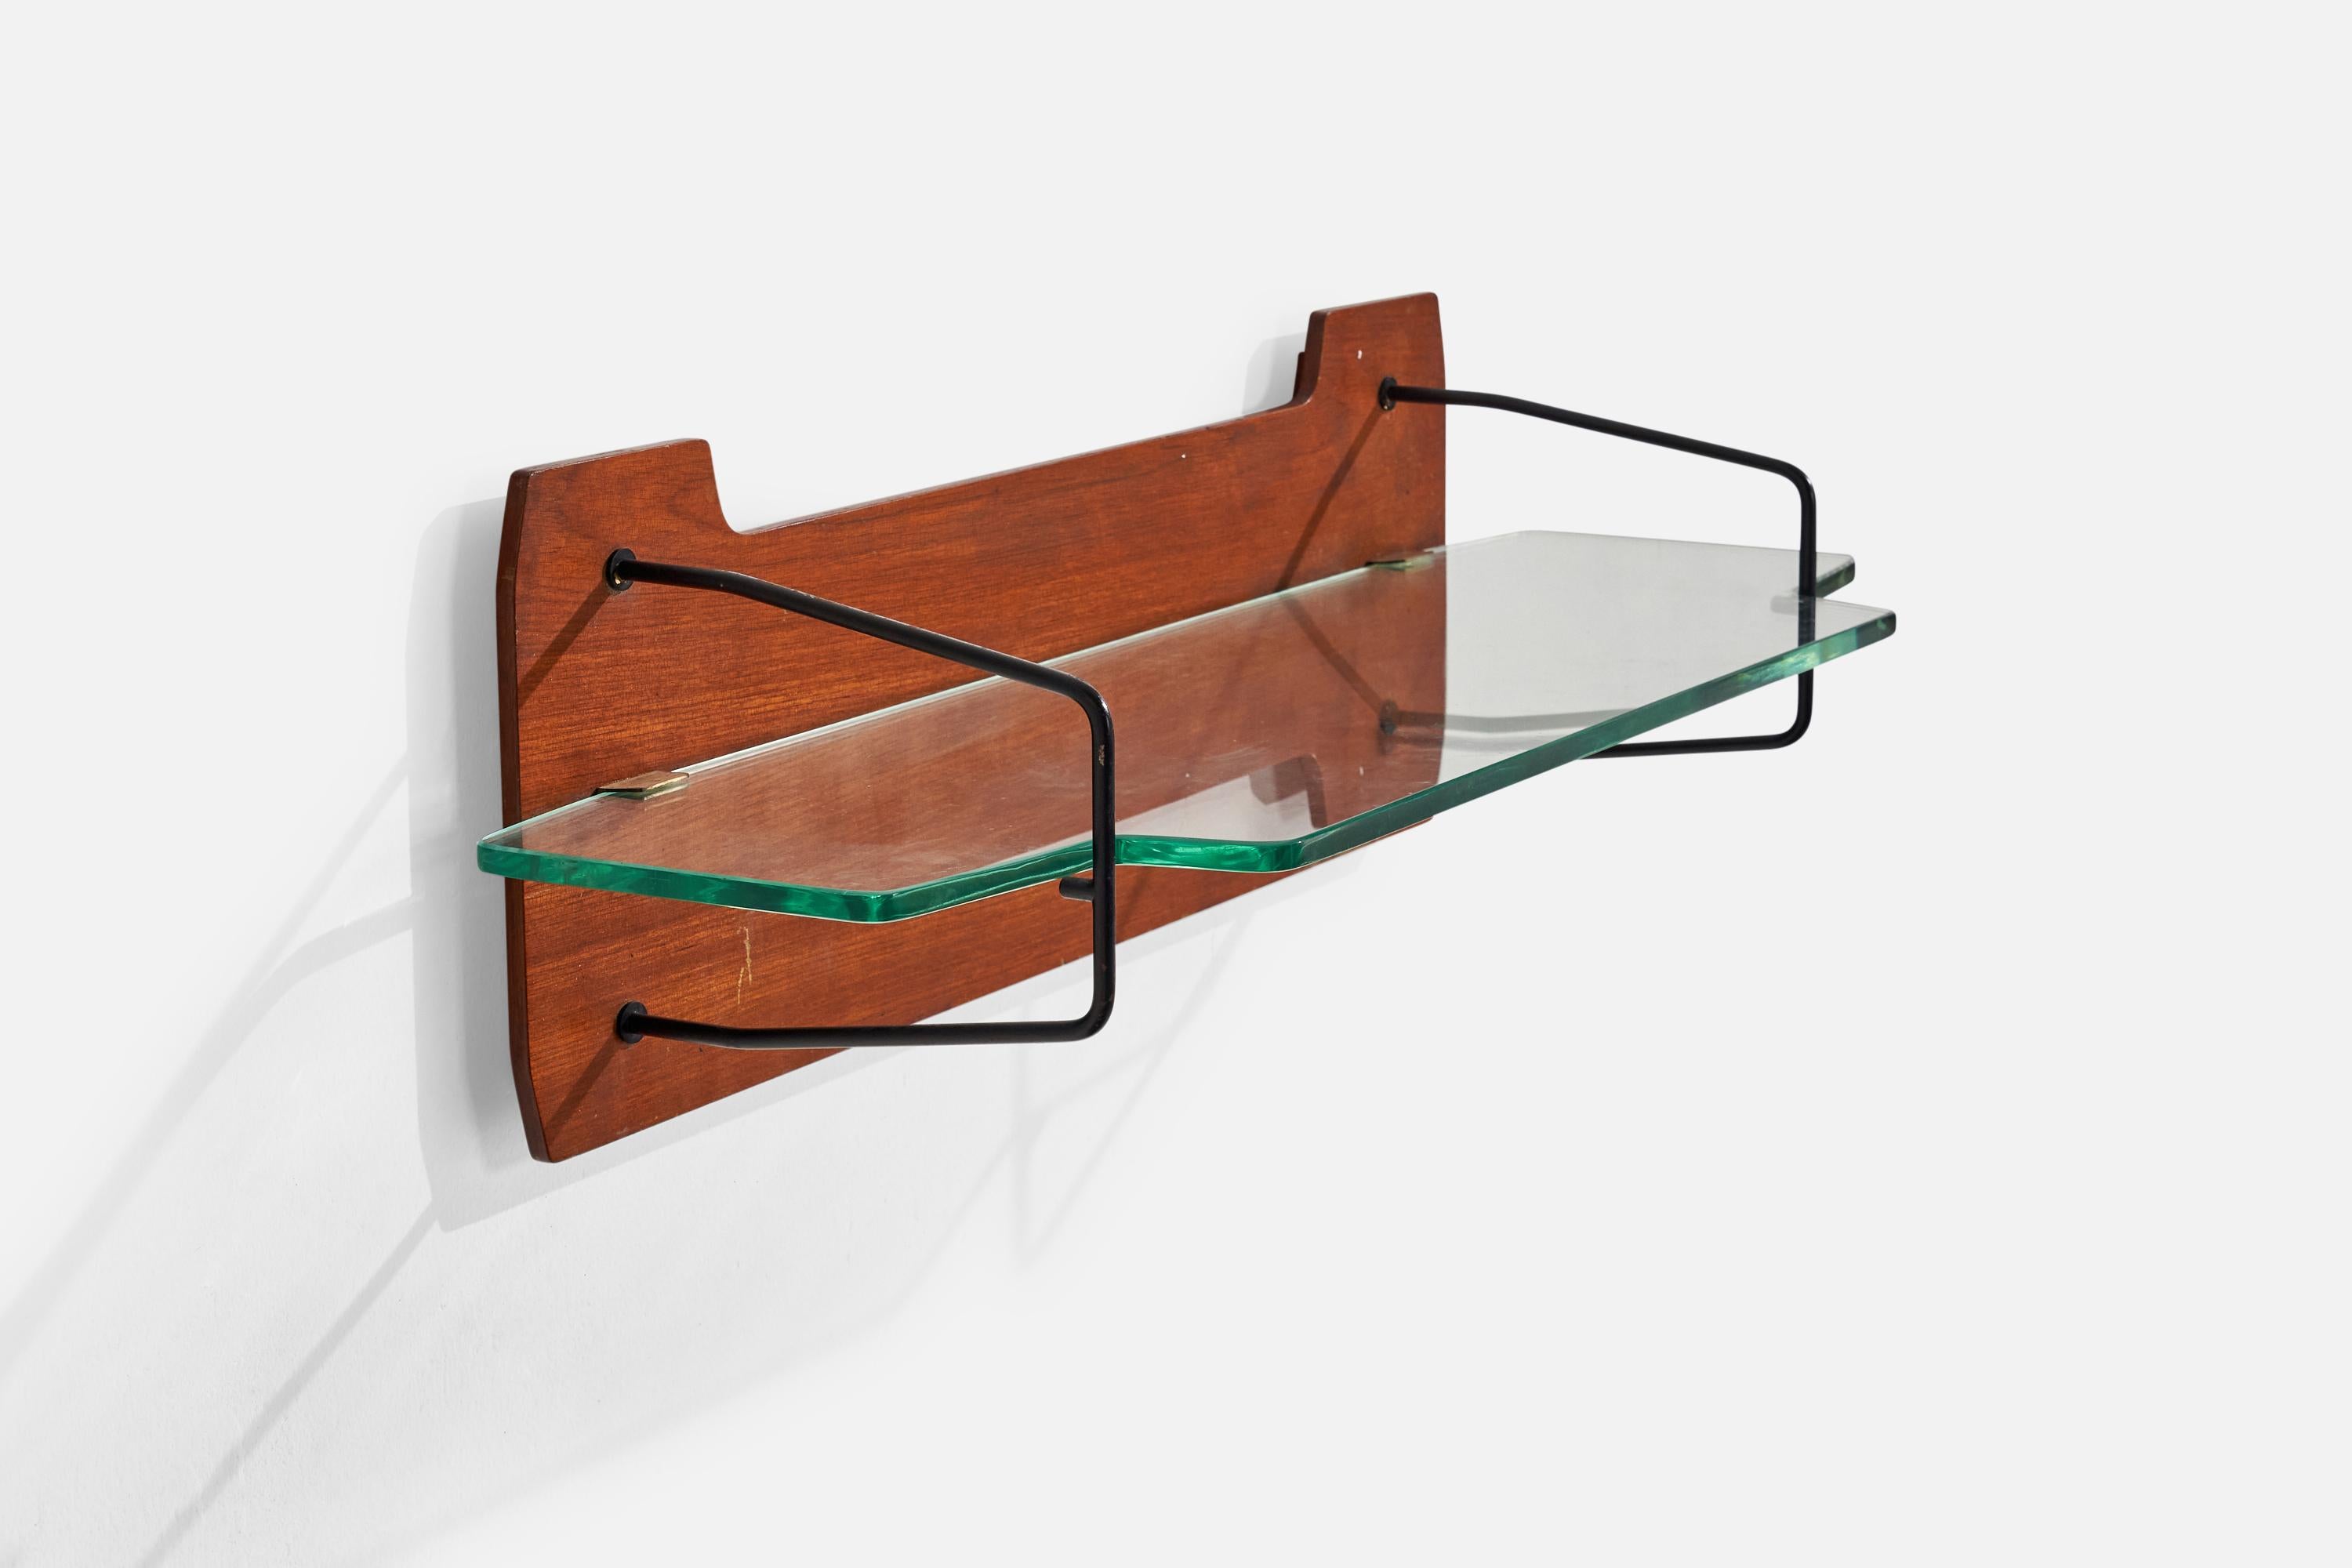 A teak, black-lacquered metal and glass wall shelf or small console designed and produced in Italy, 1950s.